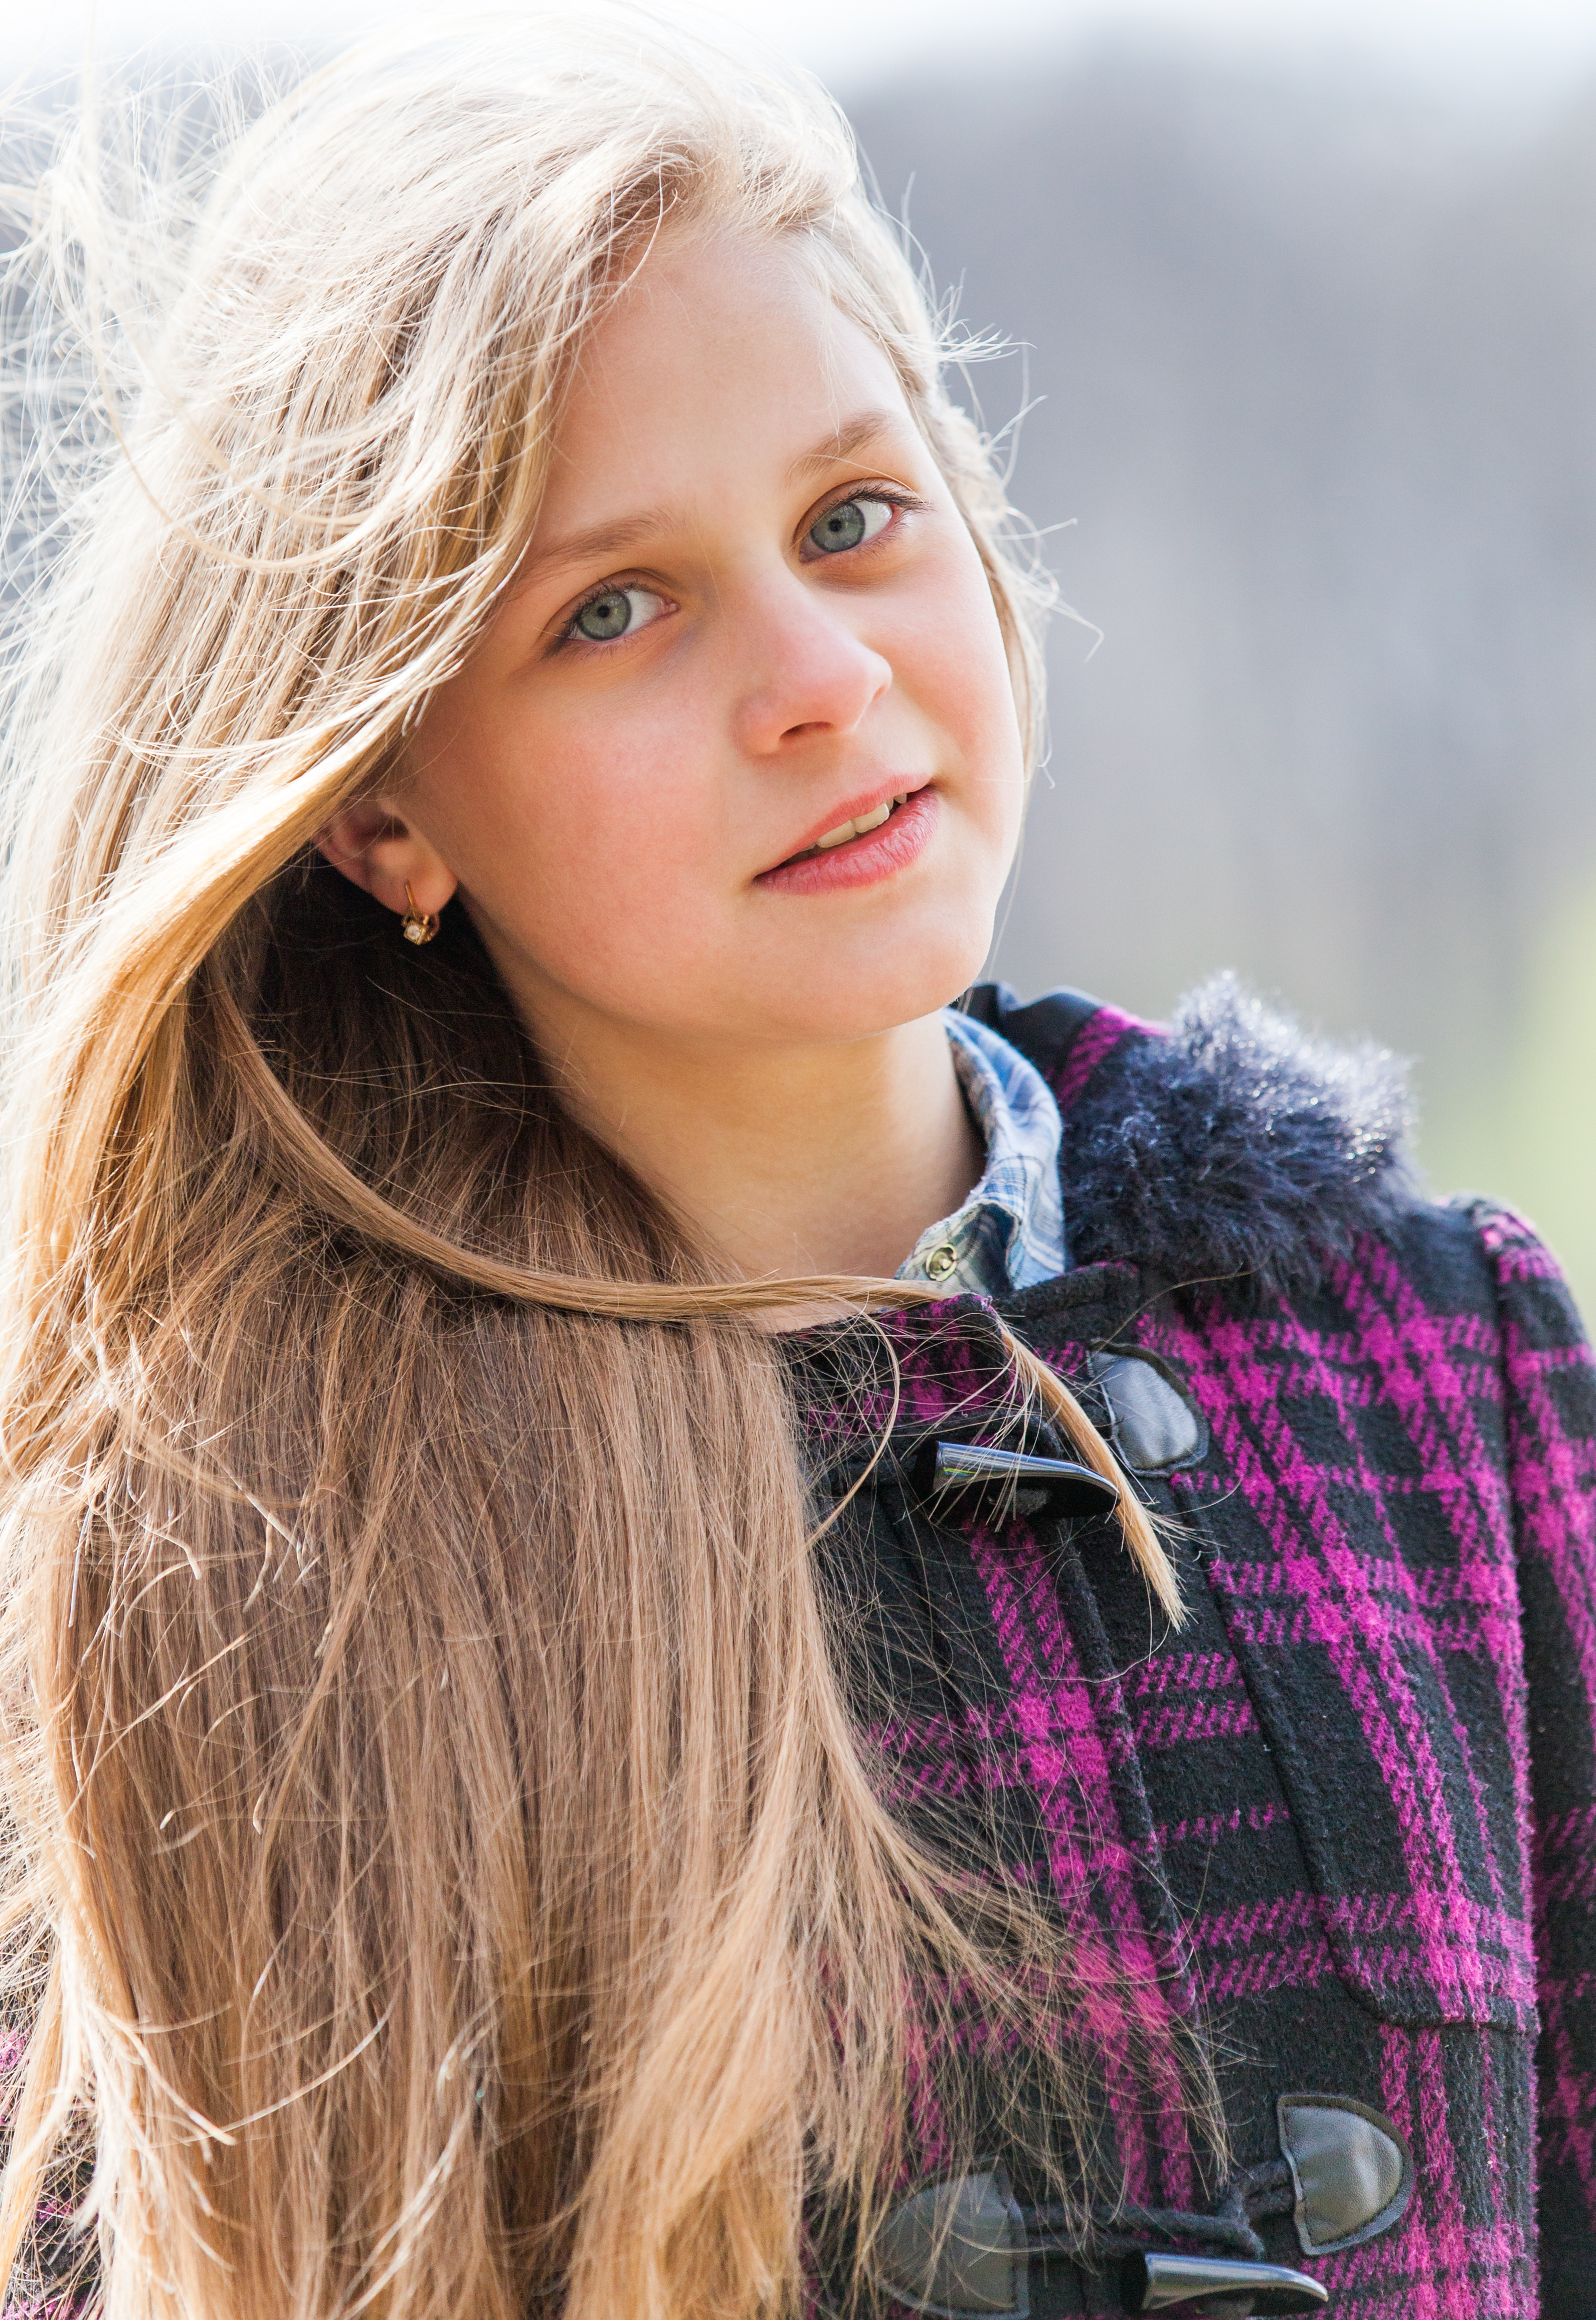 a cute blond 12-year-old girl photographed in April 2015, picture 1